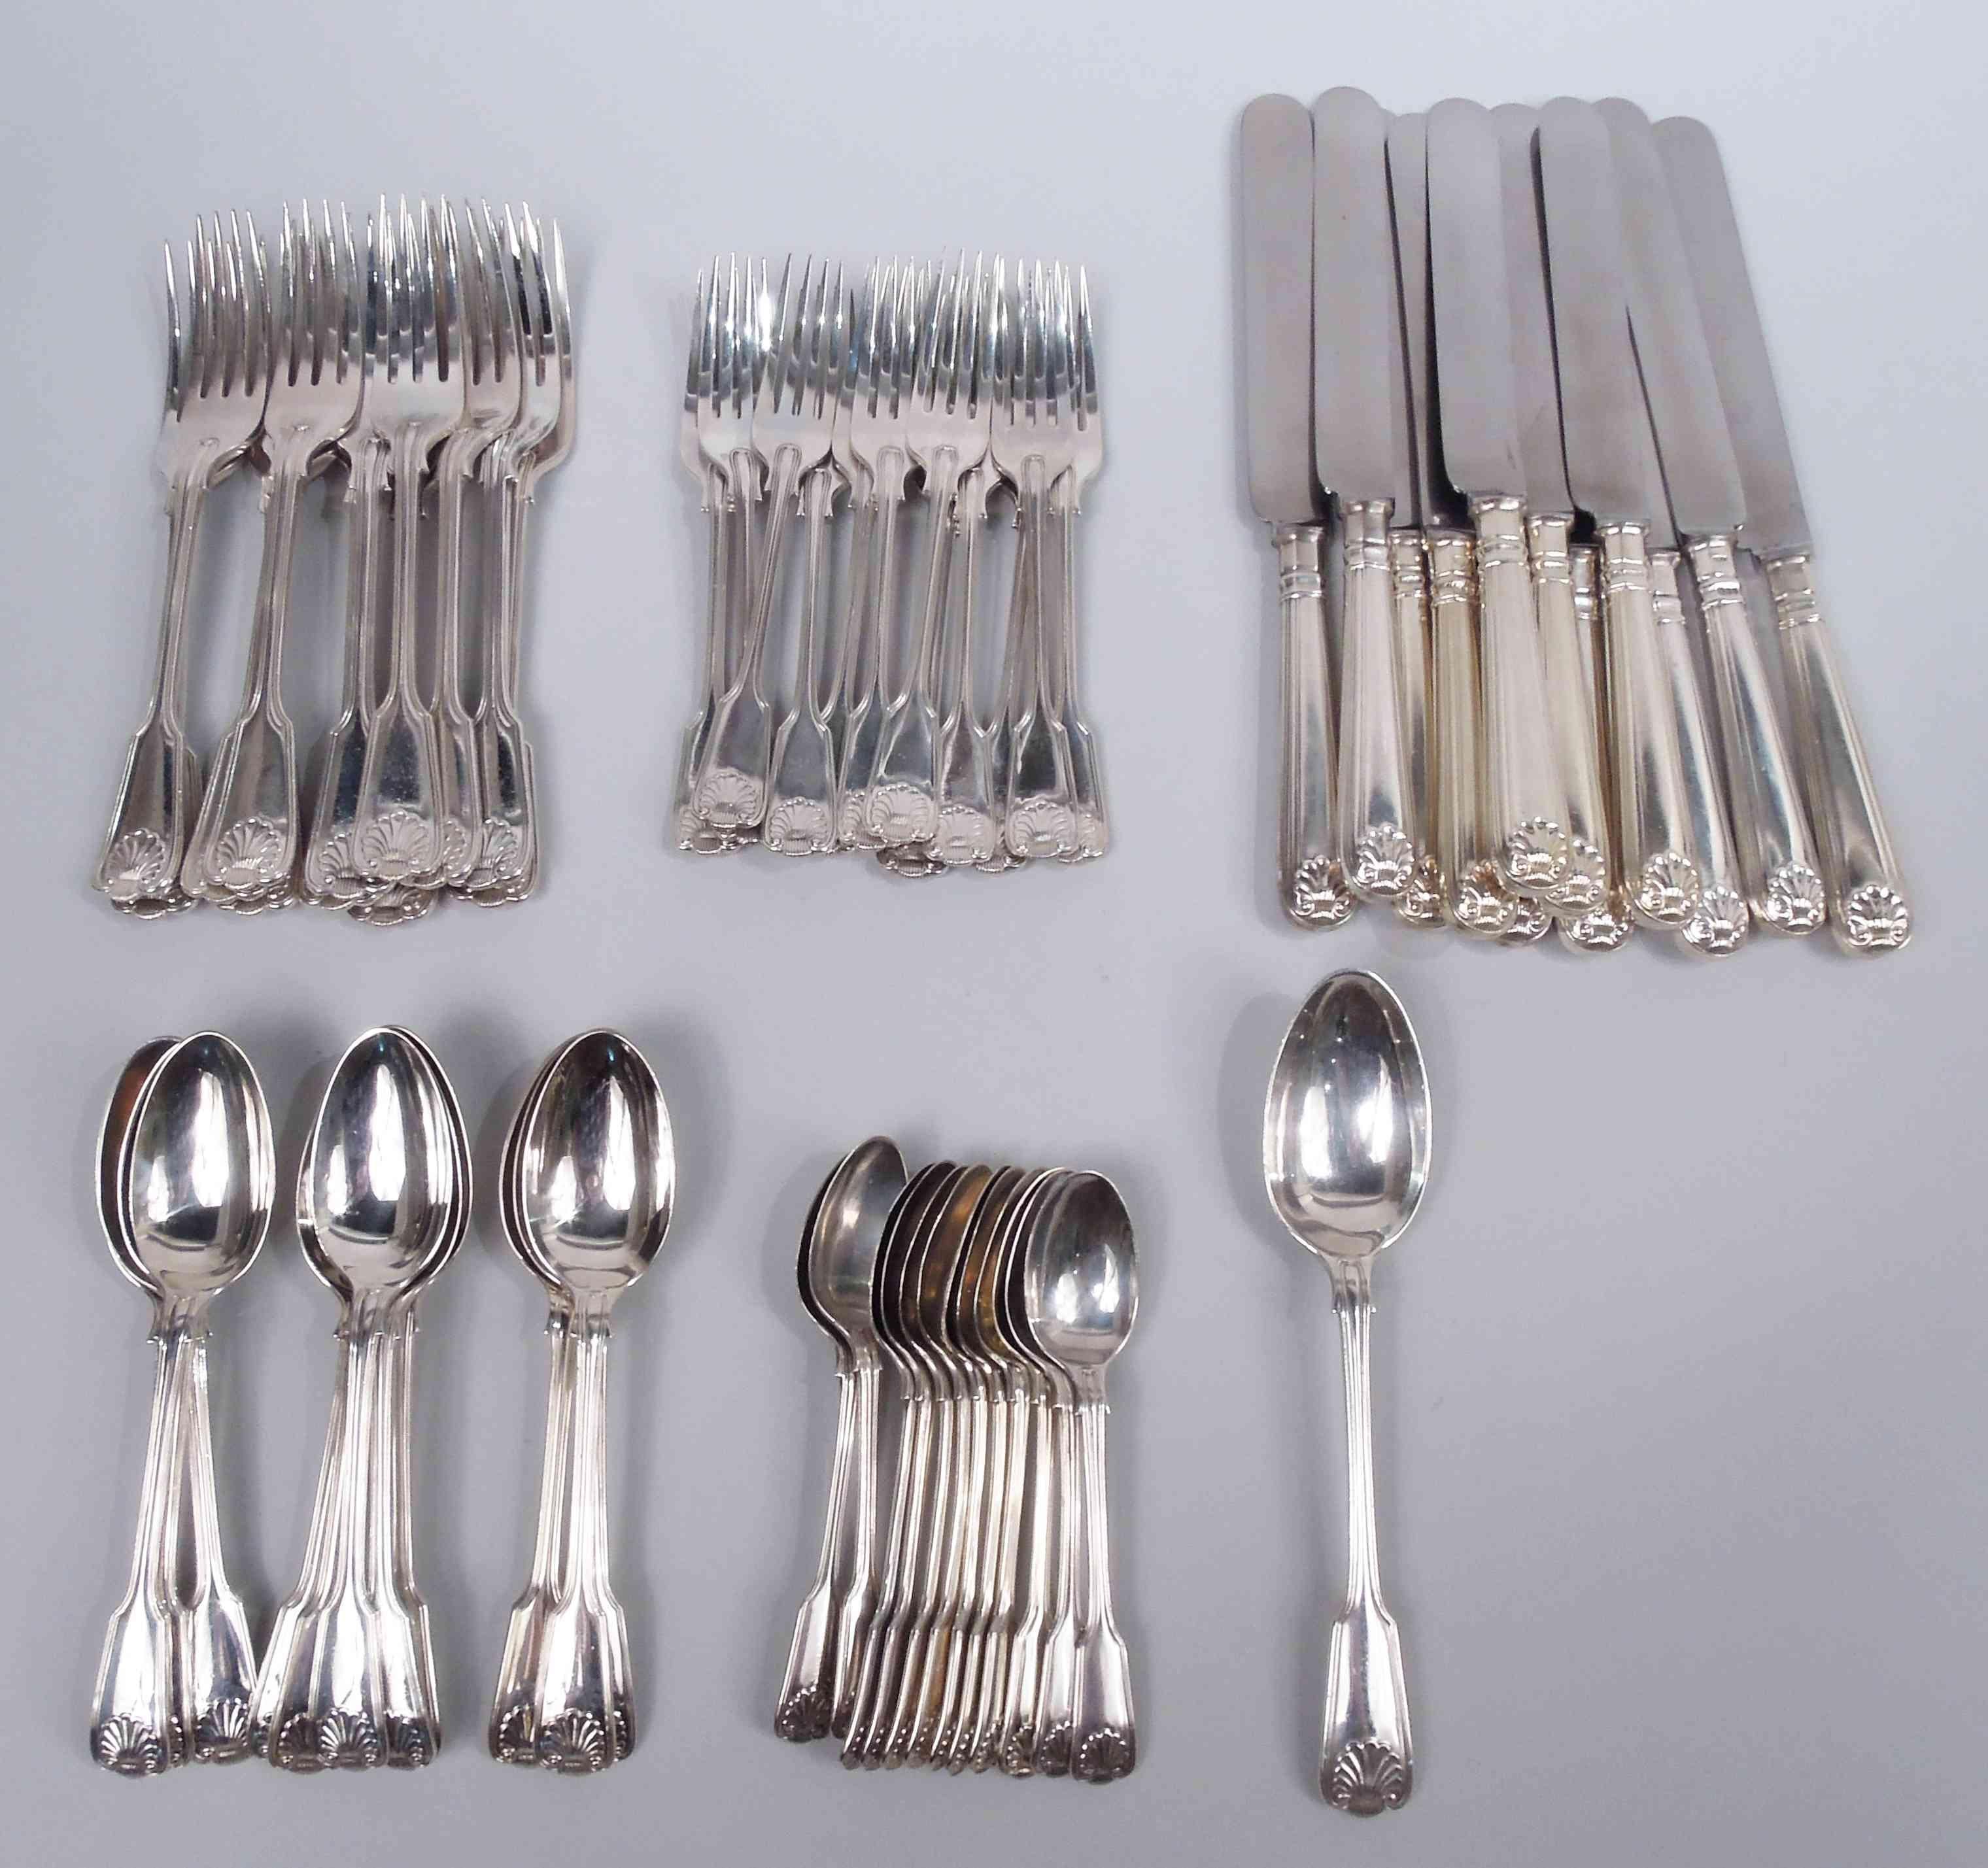 Fiddle Thread & Shell sterling silver dinner and lunch set. Made by James Robinson in London, 1980-2000. This set comprises 61 pieces (dimensions in inches):

Forks: 12 dinner forks (8 1/8) and 12 luncheon forks (7);

Spoons: 12 soup spoons (7 1/8),